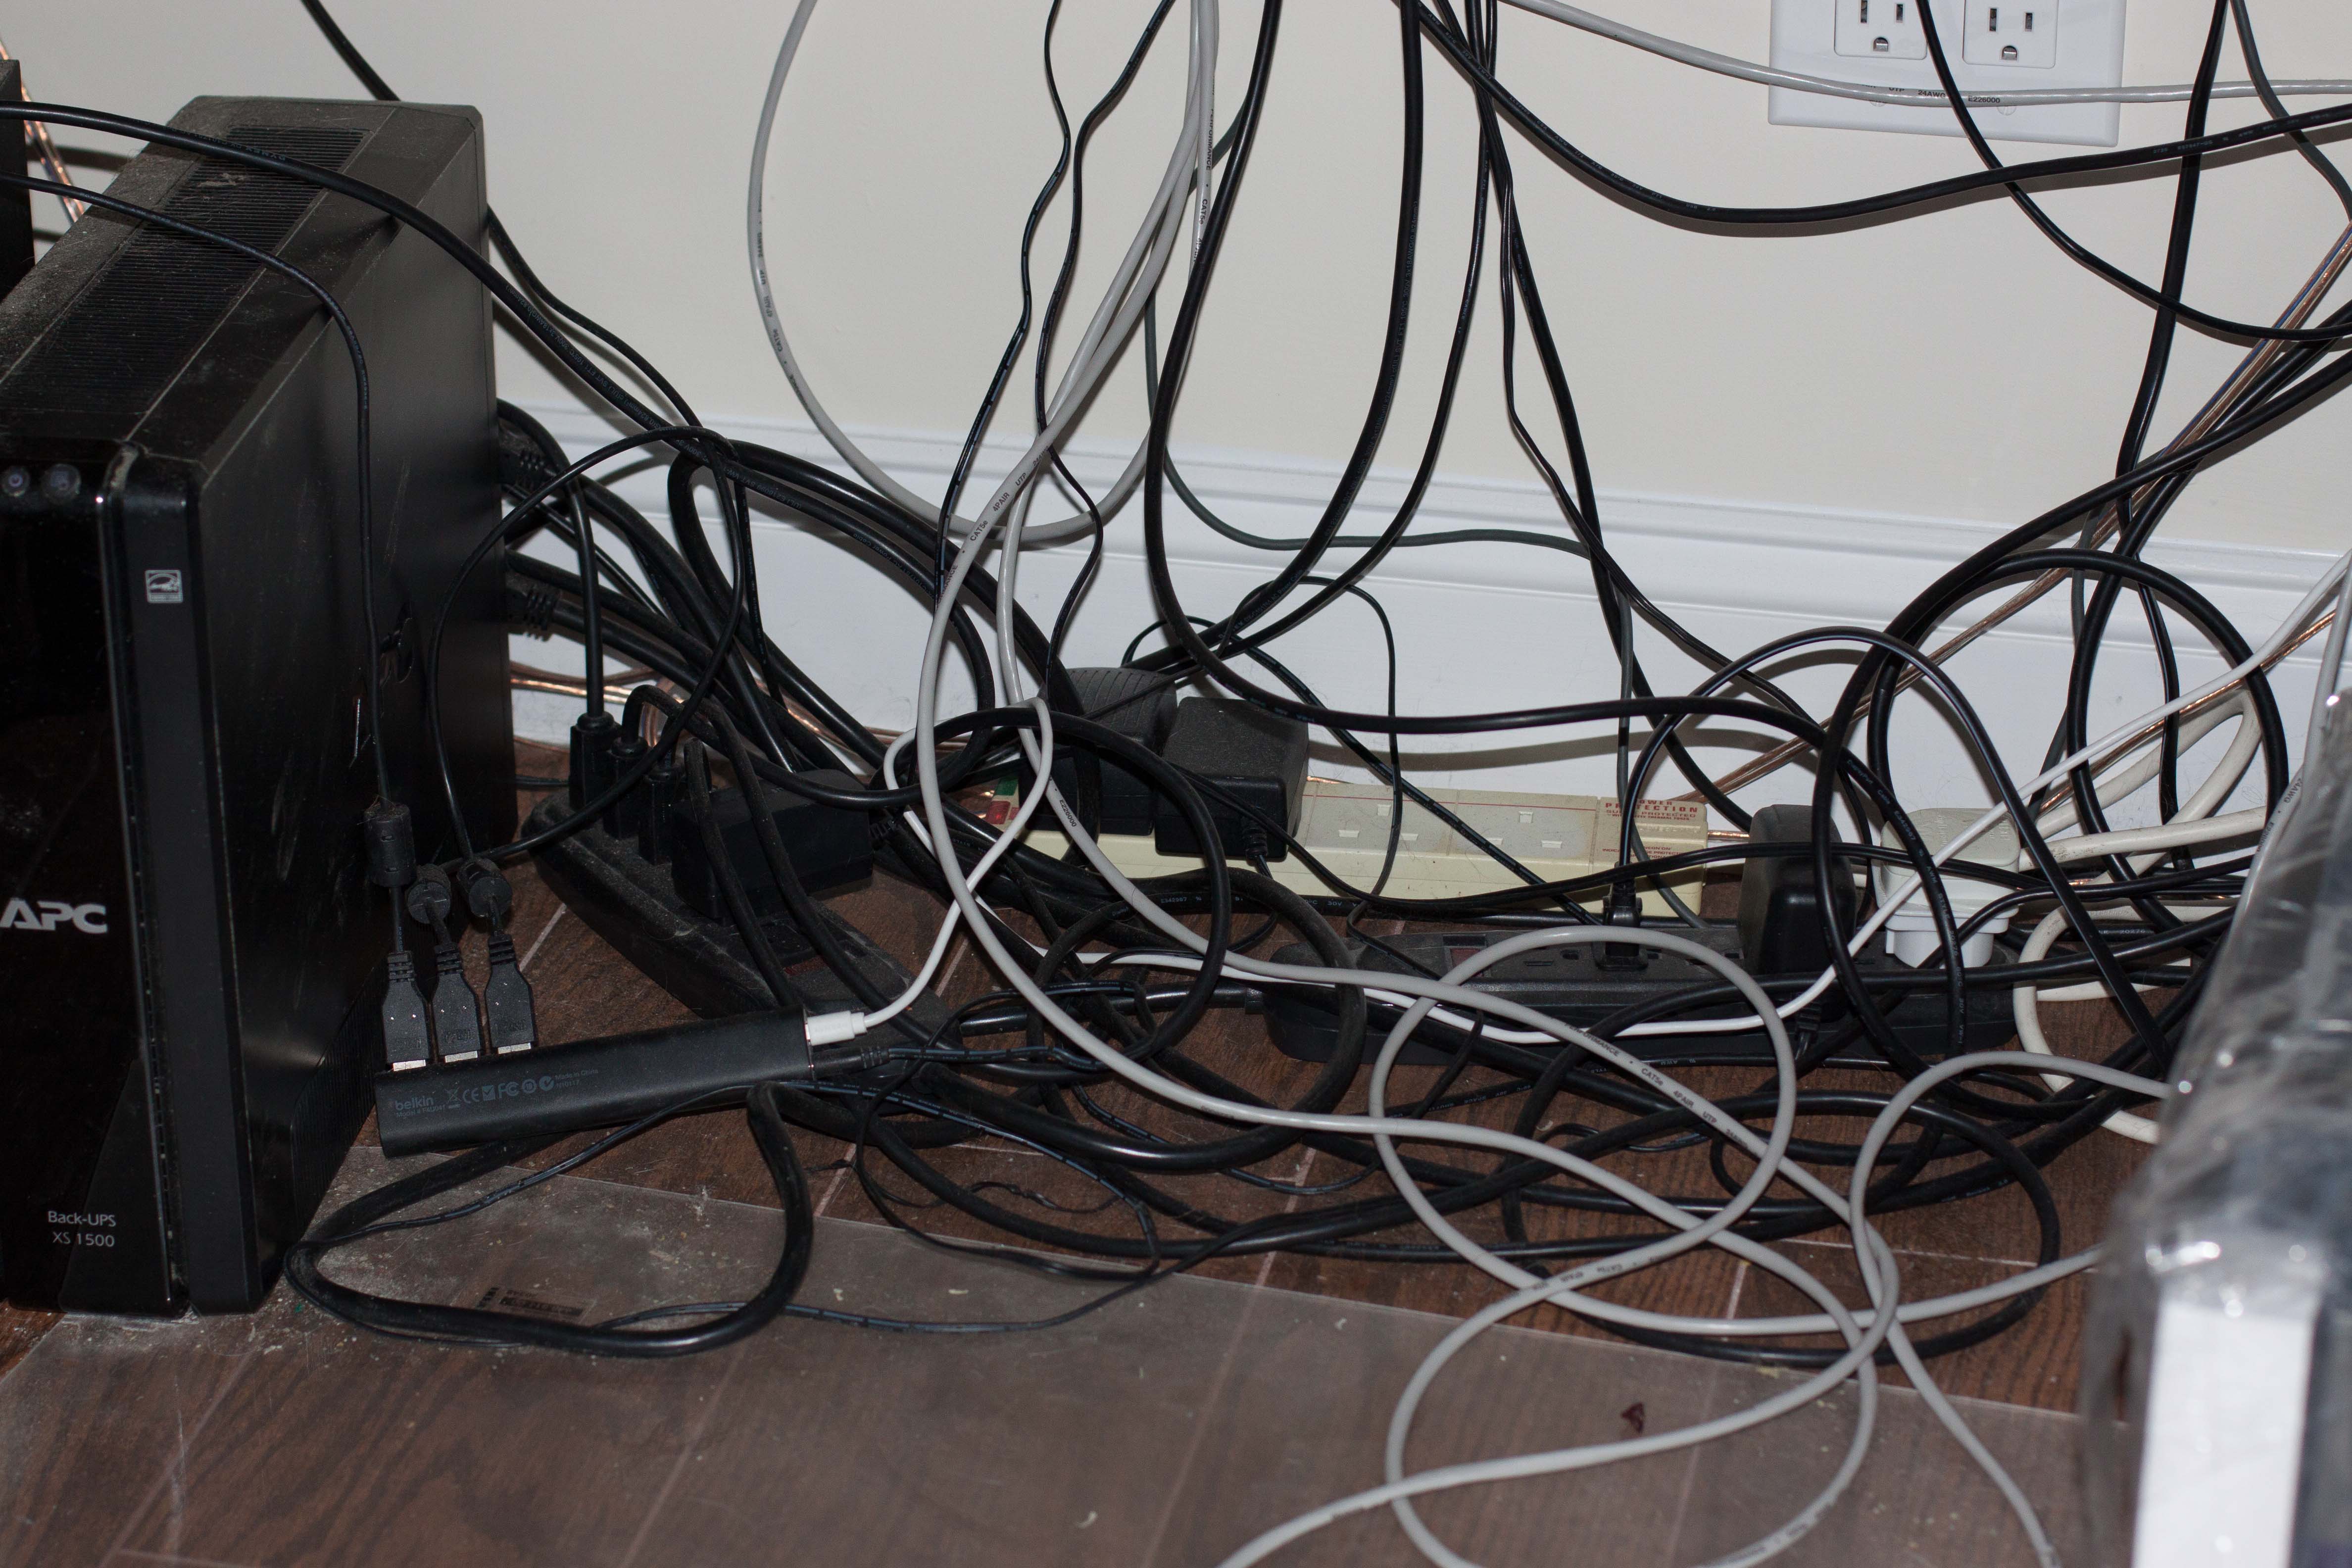 Desk Cable Management - Route Cables and Keep Them Hidden